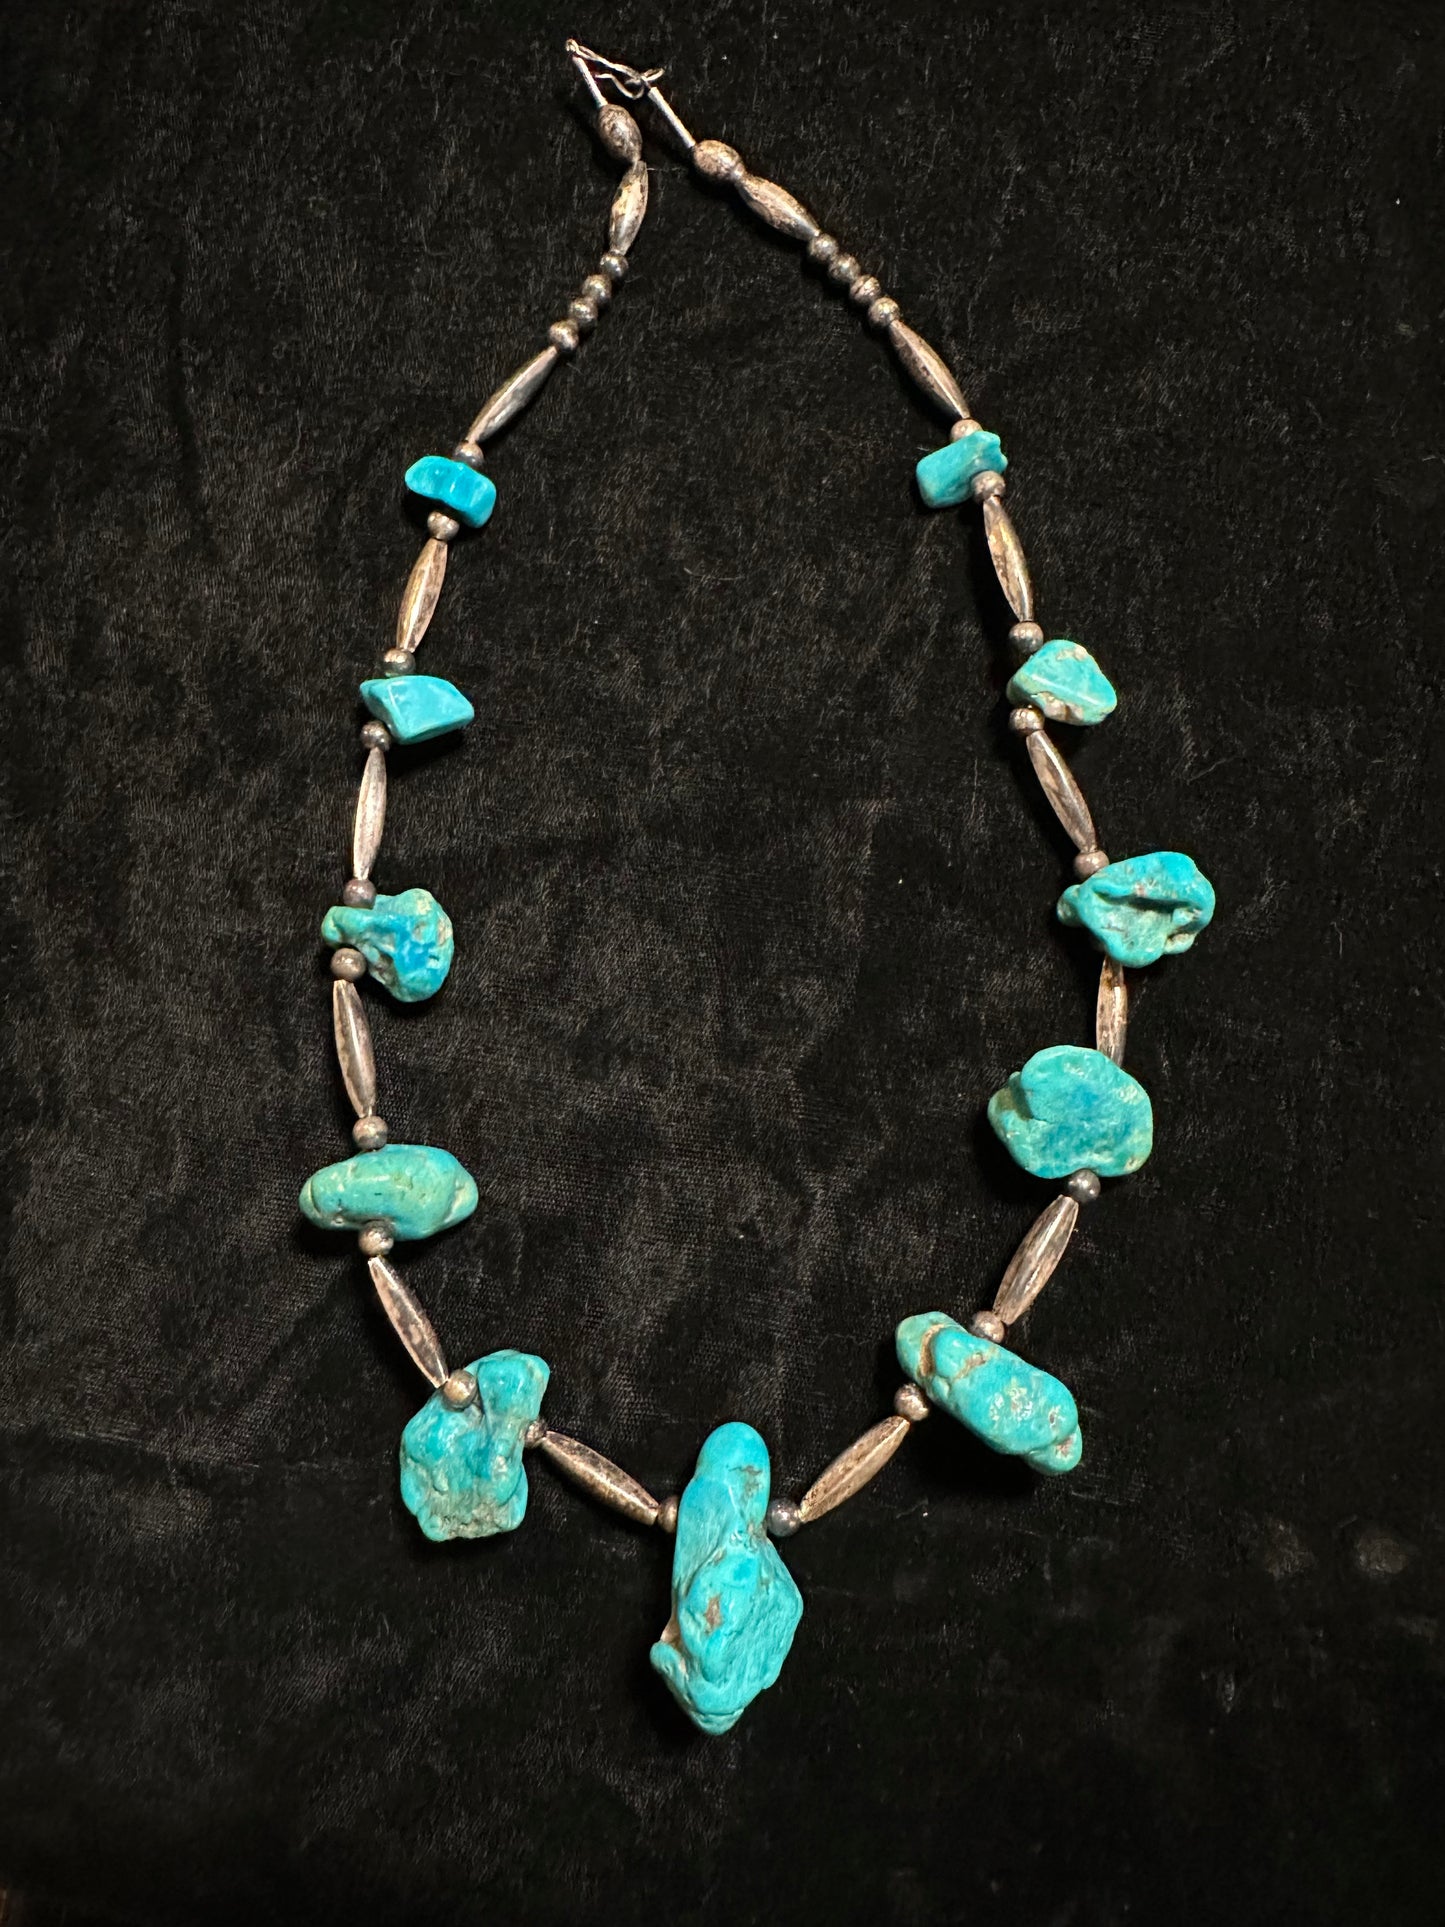 22” Vintage Turquoise Nugget Necklace With Navajo Pearls